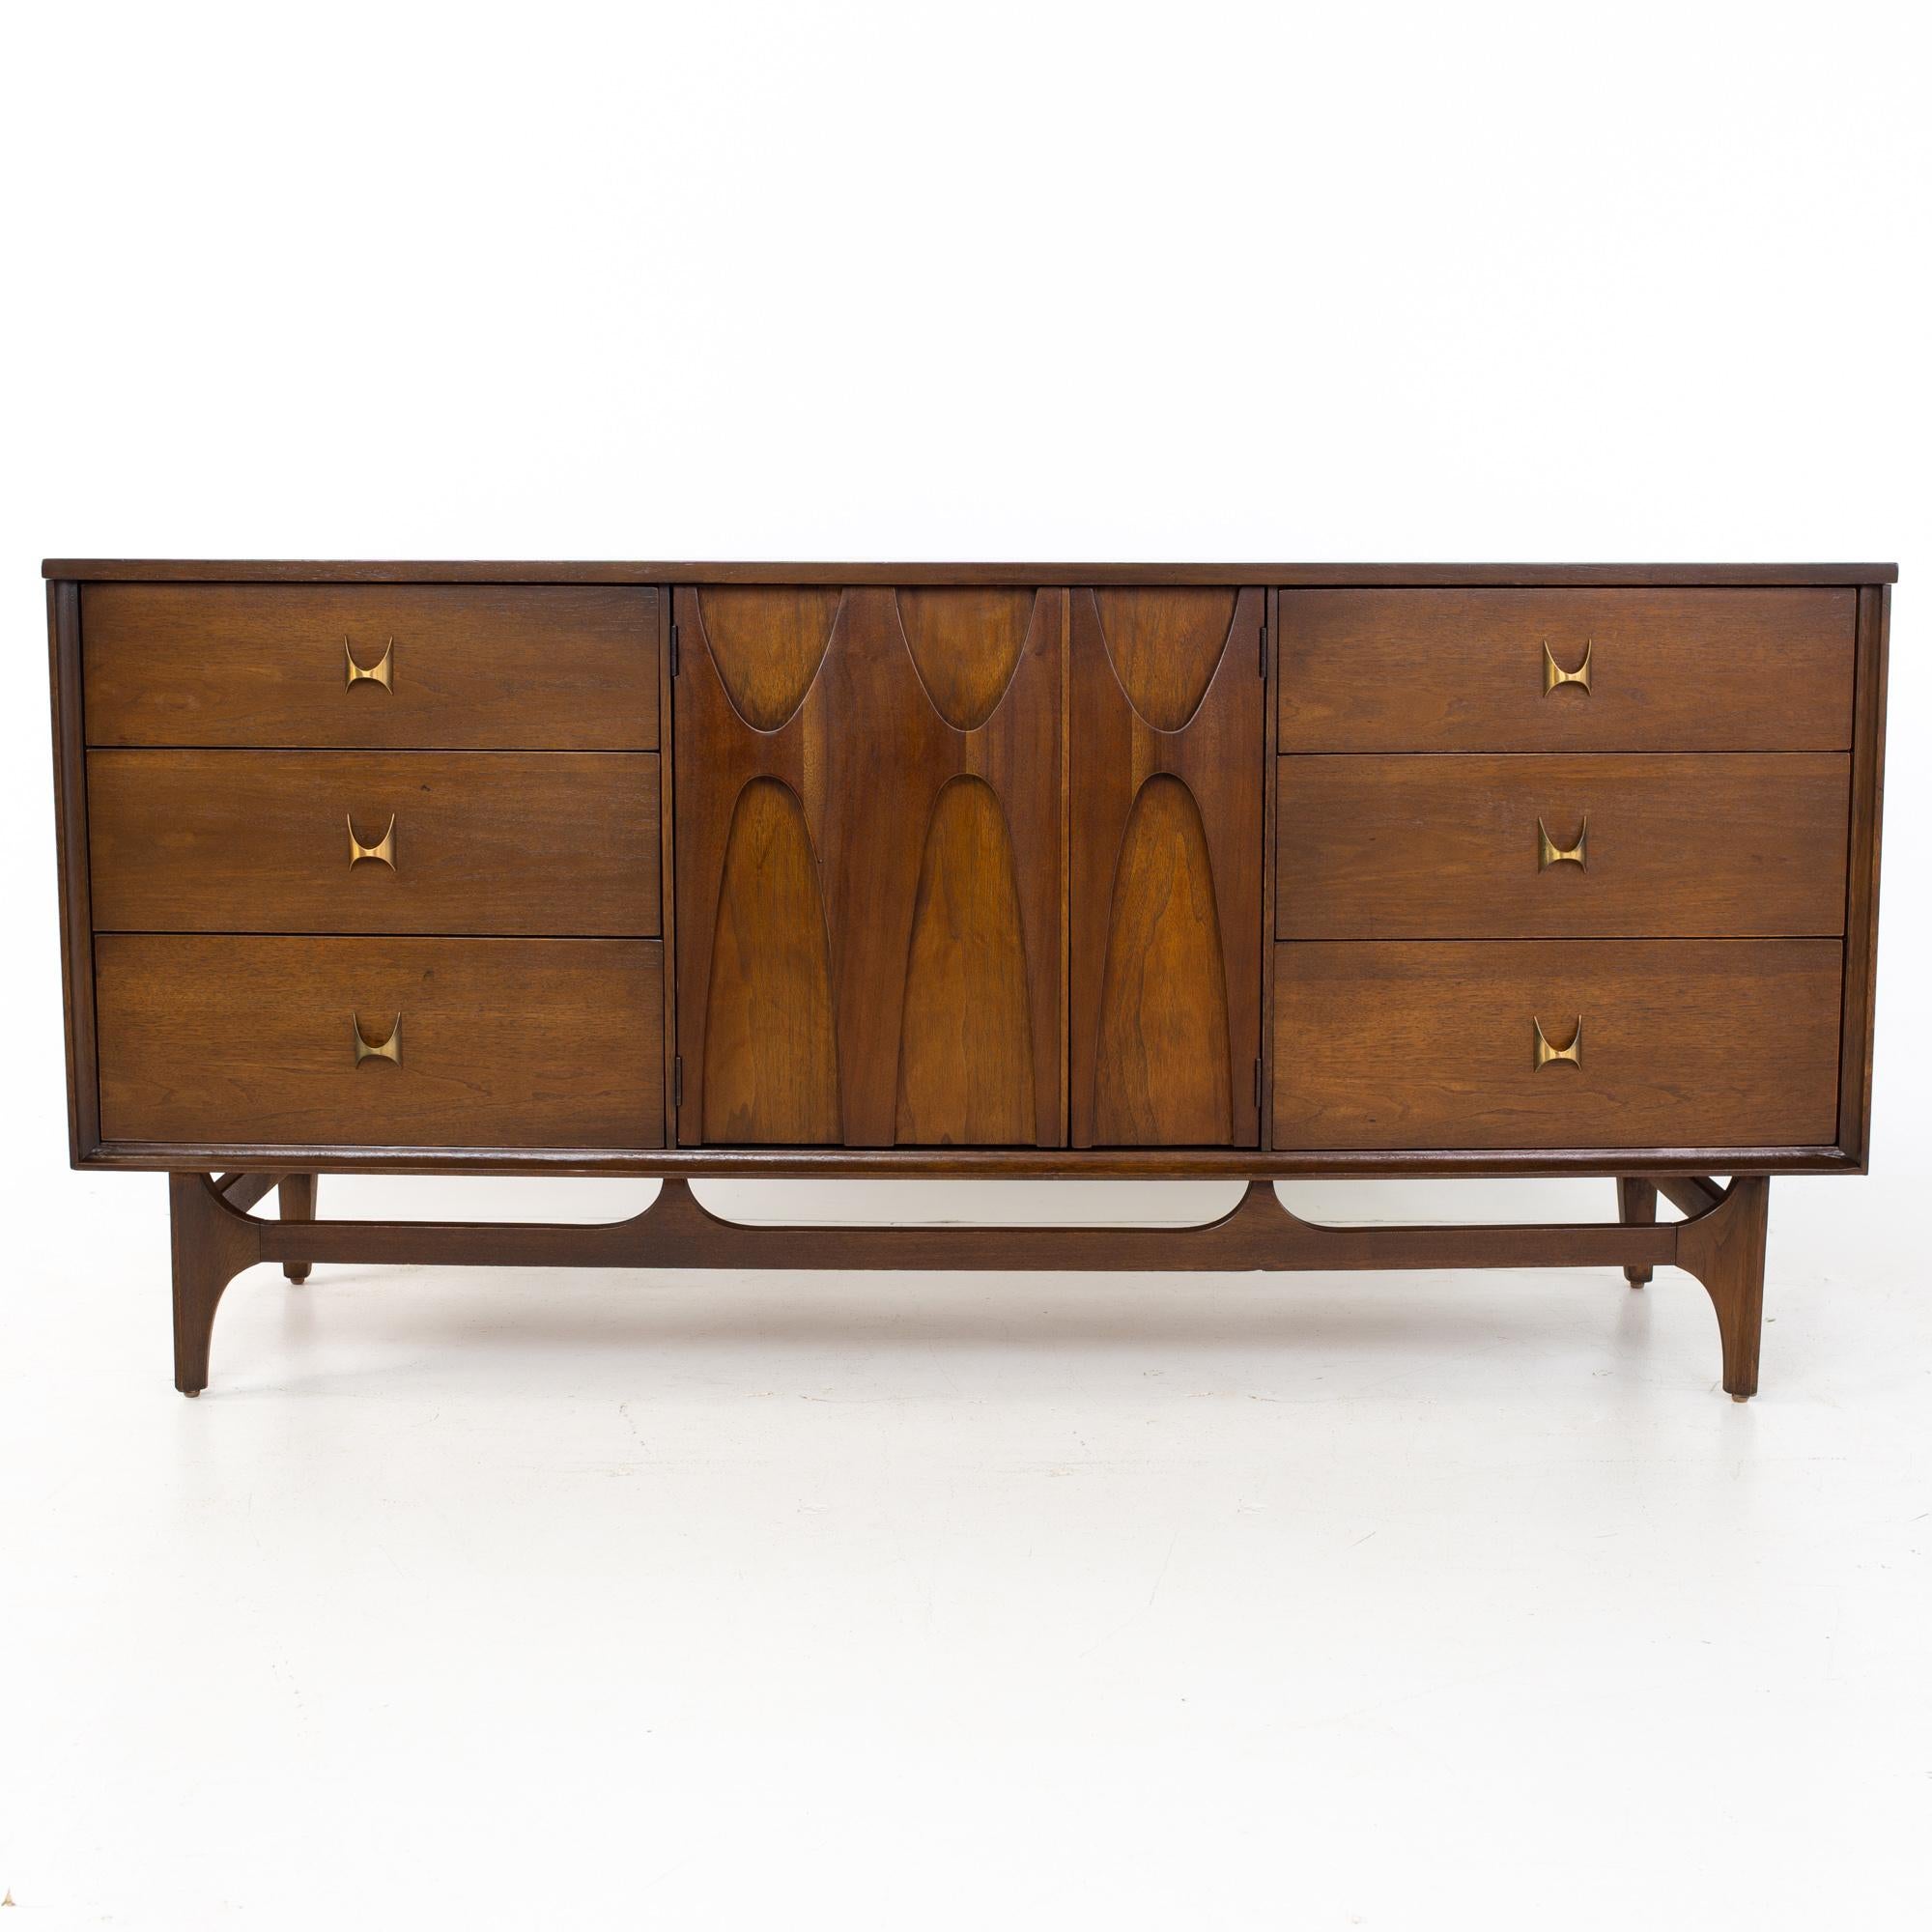 Broyhill Brasilia mid century 9 drawer lowboy dresser
Dresser measures: 66 wide x 19 deep x 31 inches high

All pieces of furniture can be had in what we call restored vintage condition. That means the piece is restored upon purchase so it’s free